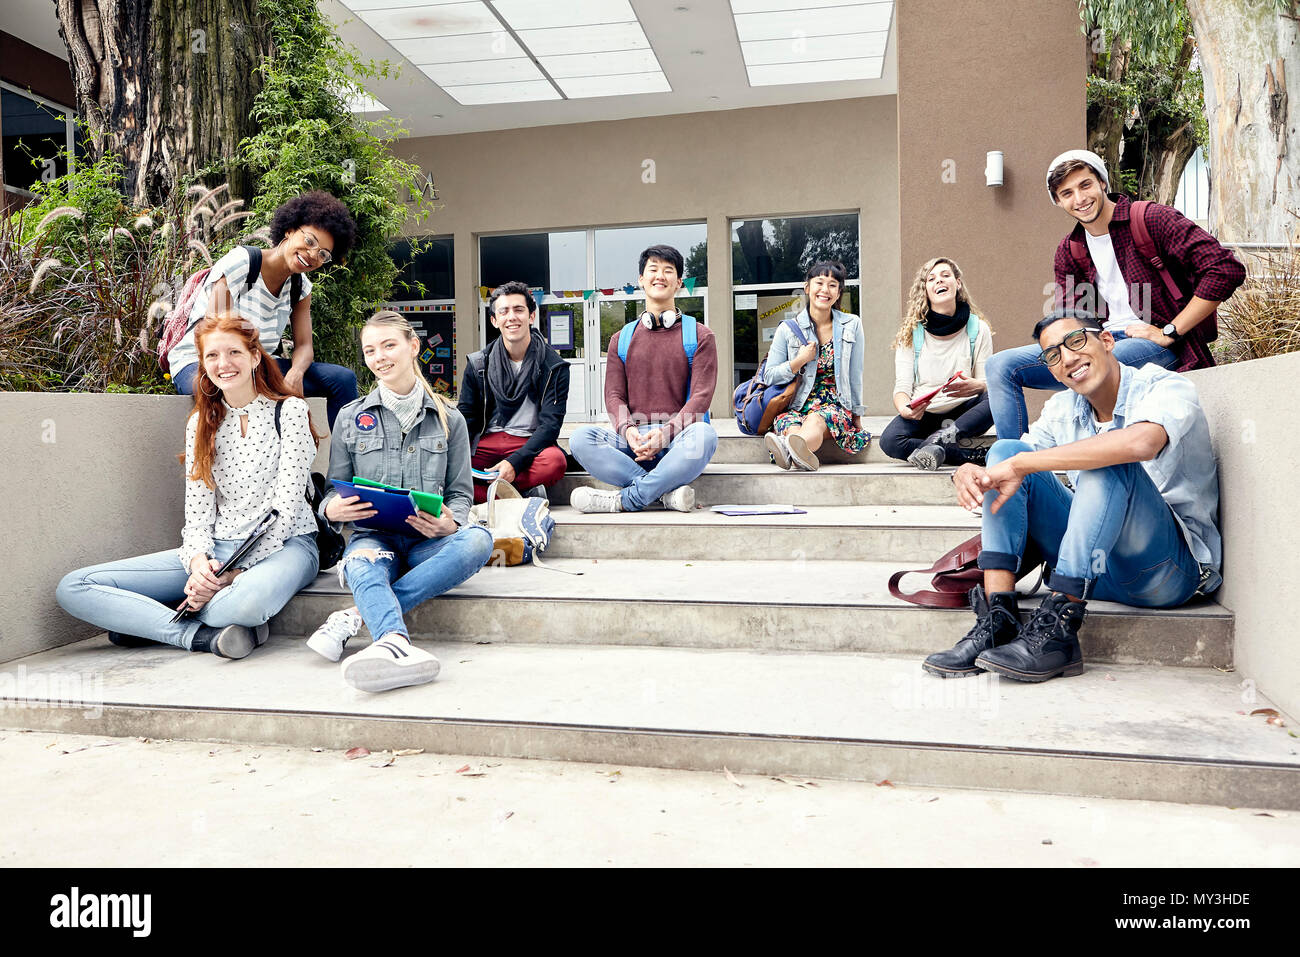 College students sitting on steps outside building, portrait Stock Photo